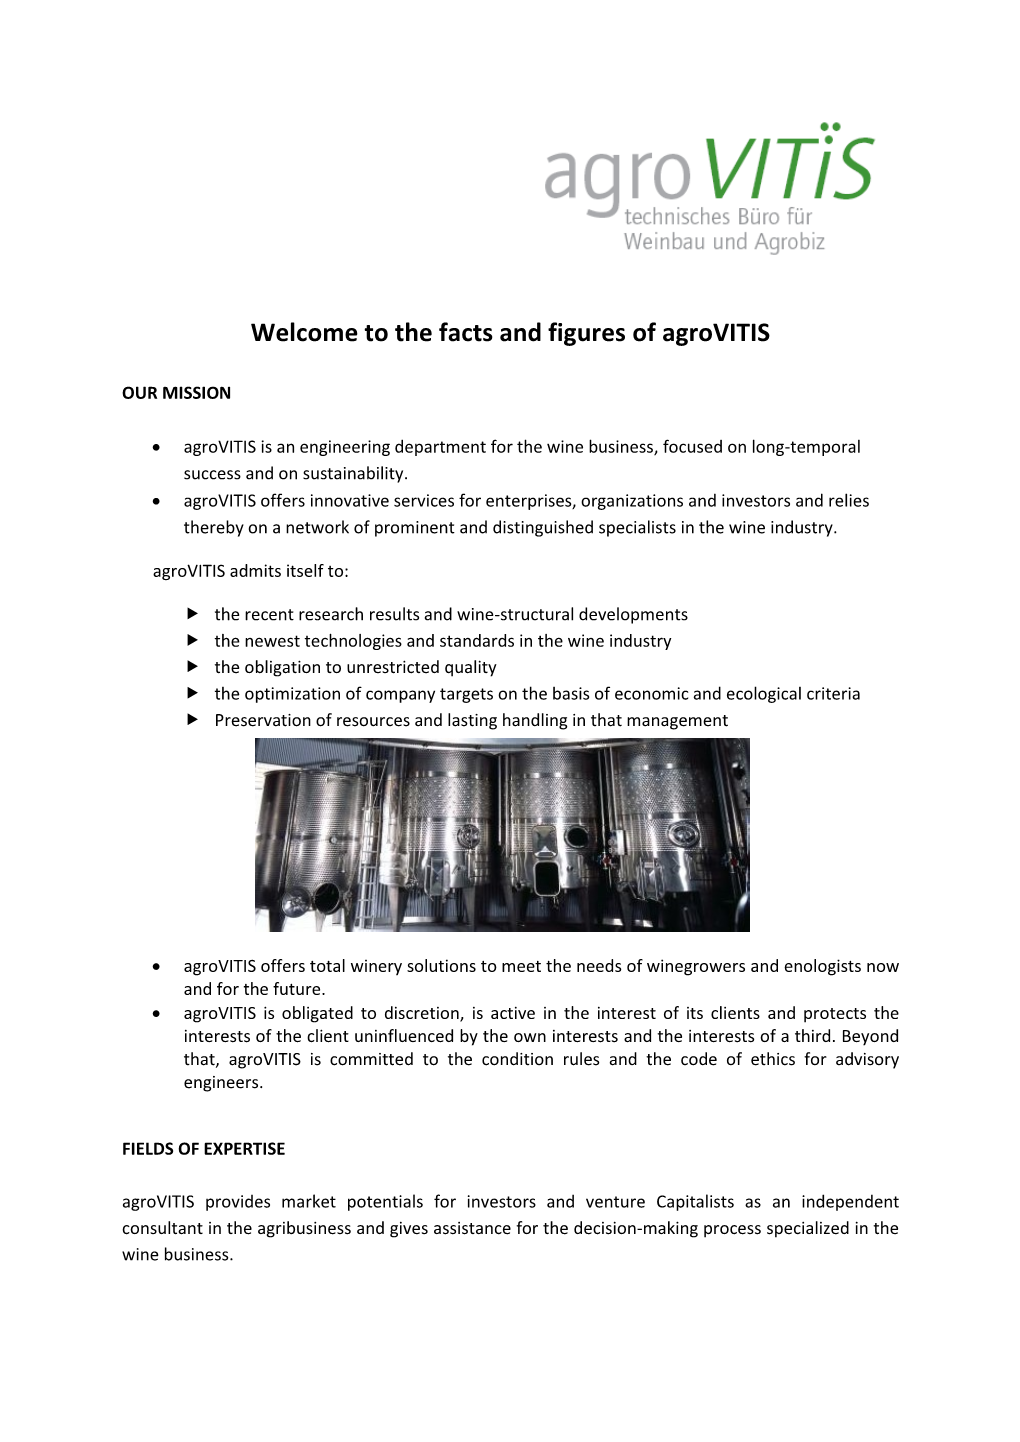 Welcome to the Facts and Figures of Agrovitis